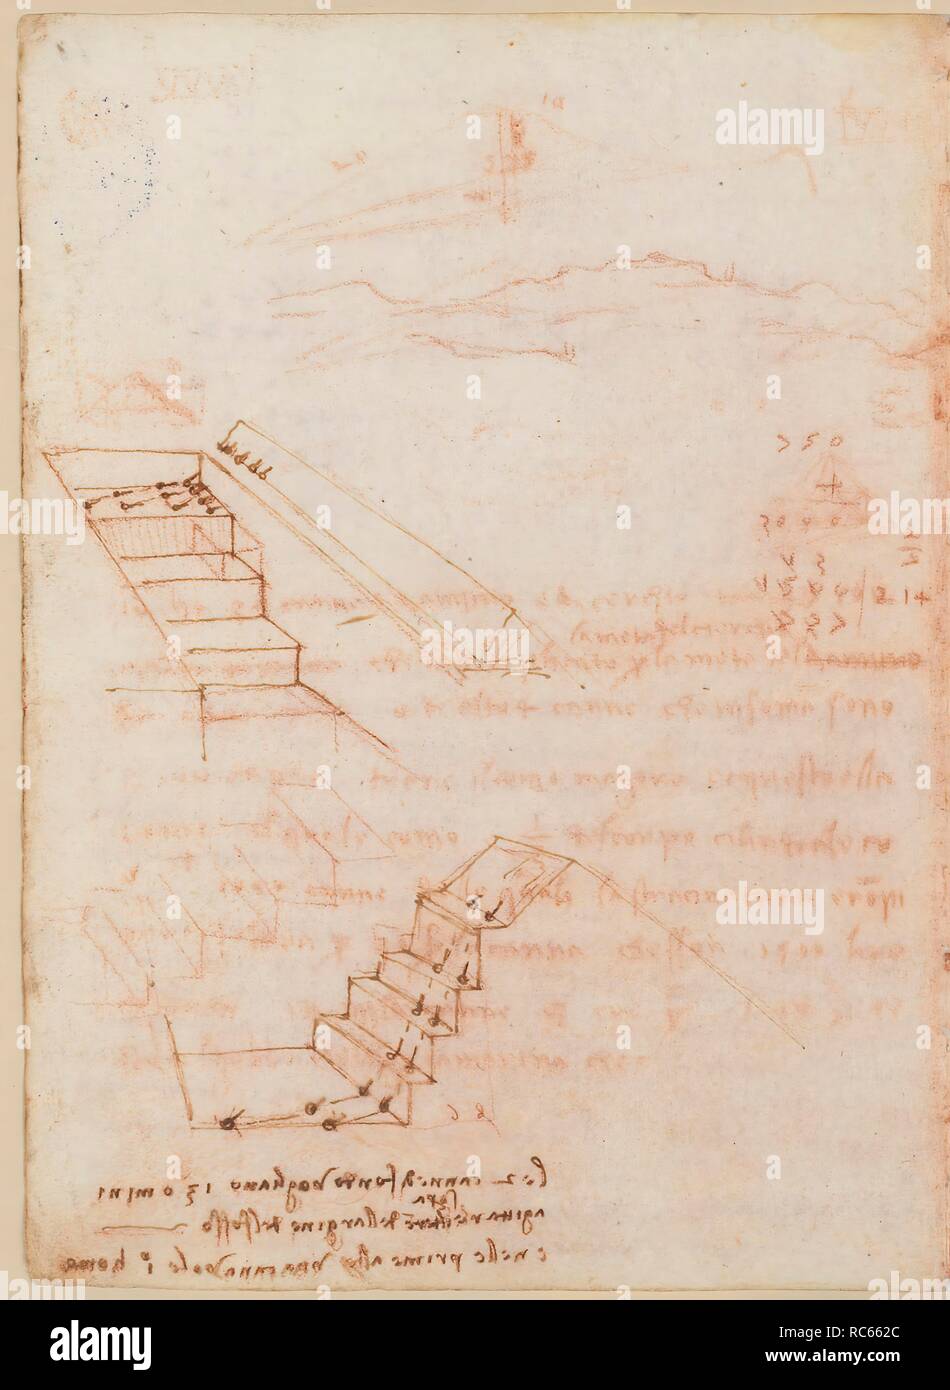 Folio f 10v. Codex Madrid II (Ms. 8936) 'Treaty of fortification, statics and geometry'. 158 folios with 316 pages. Internal format: 210 x 145 mm. OBSERVATION OF NATURE. CIVIL ENGINEERING, CONSTRUCTION. MILITARY ENGINEERING, FORTIFICATIONS. MATH OPERATIONS, ACCOUNTING NOTES. UNITS OF WEIGHT AND MEASURES. PRINCIPLES OF MECHANICS, CINEMATICS, DYNAMICS. Museum: BIBLIOTECA NACIONAL DE ESPAÑA, MADRID. Author: LEONARDO DA VINCI. Stock Photo